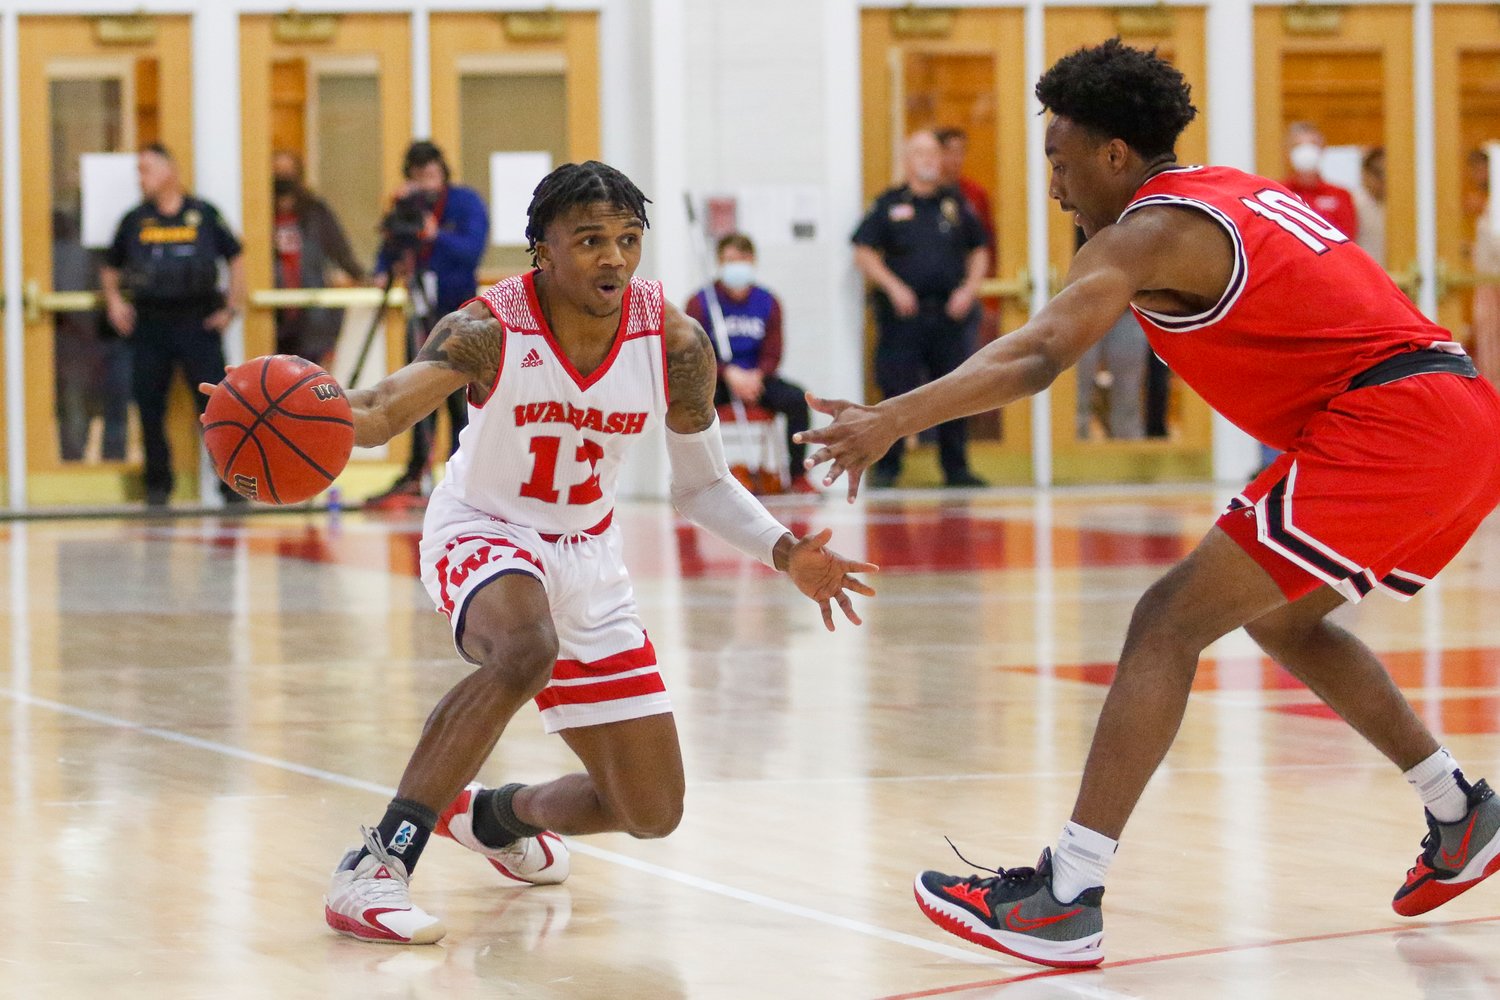 Sophomore Edreece Redmond scored a career high 15 pts for the Little Giants as they are now just one win away from their first ever NCAC Title.